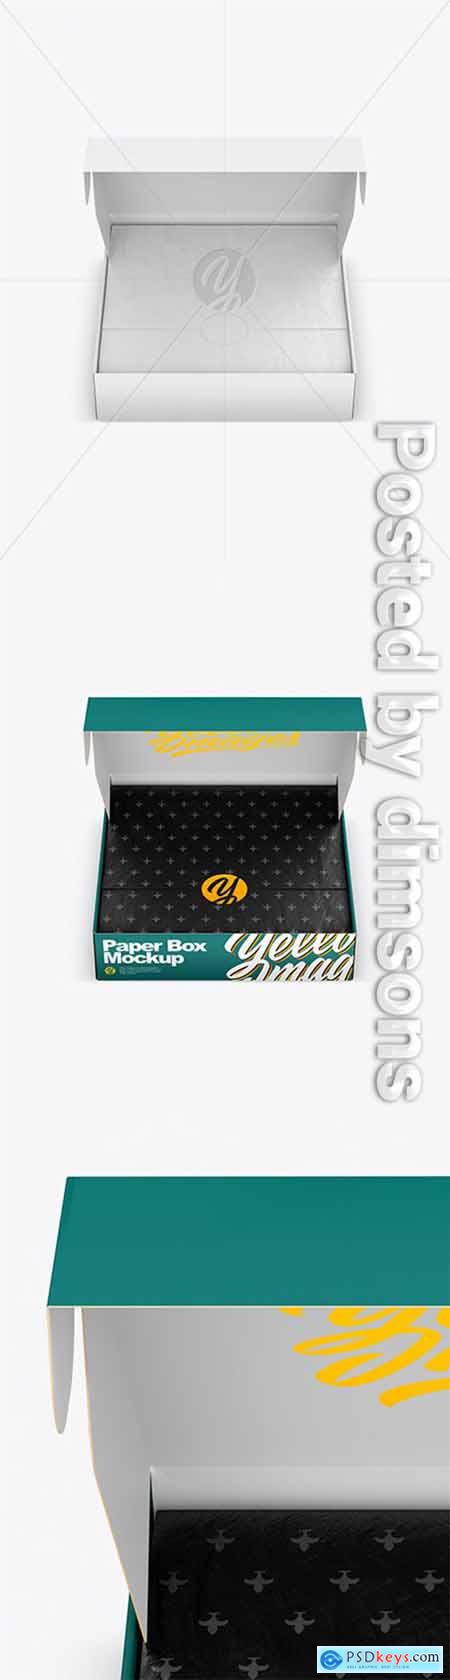 Download Opened Paper Box Mockup 44012 » Free Download Photoshop ...